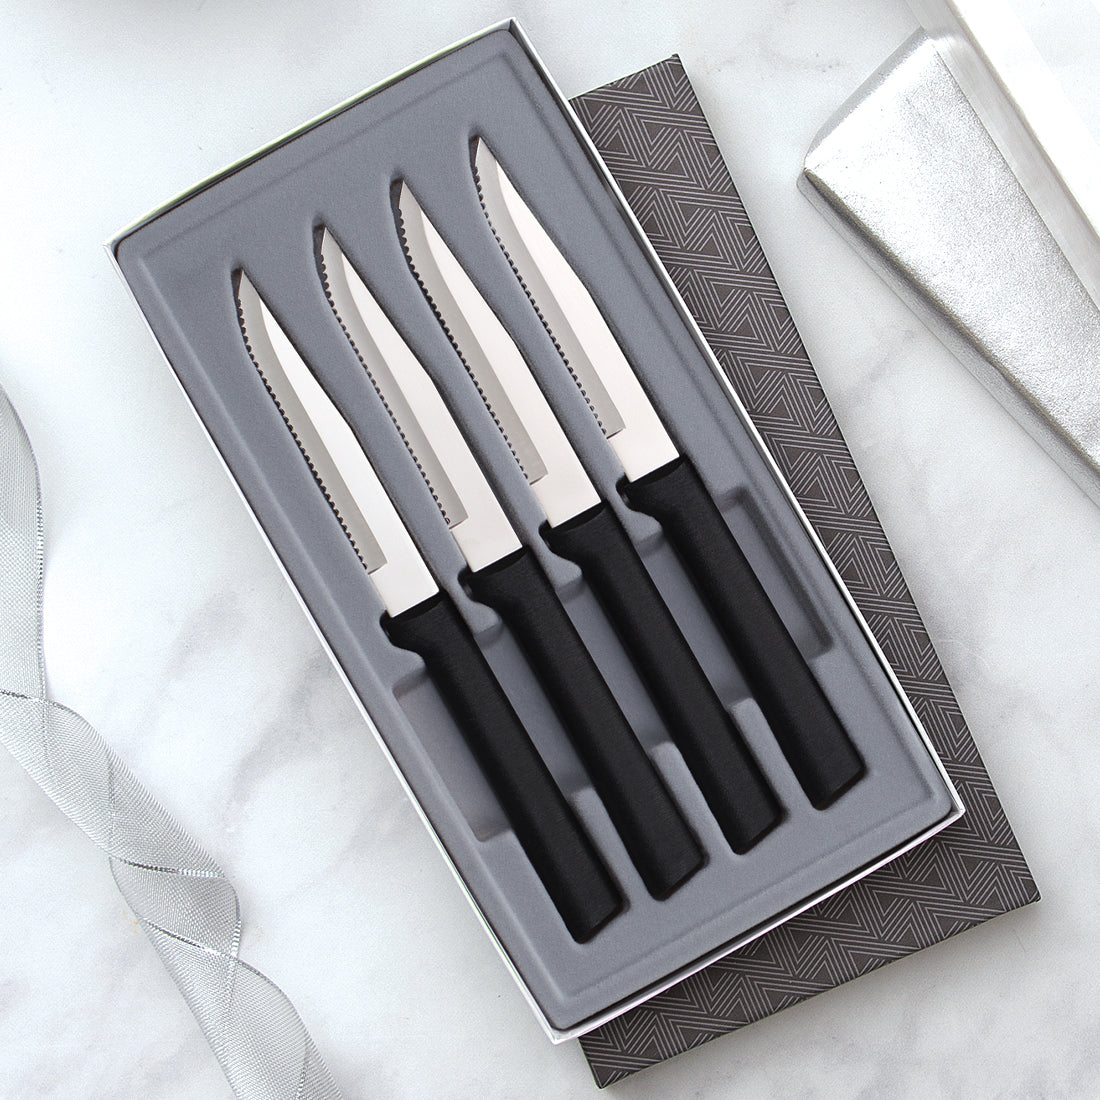 Premium Steak Knives,Stainless Steel Steak Knives Serrated set of 6 by  SHAGGAL